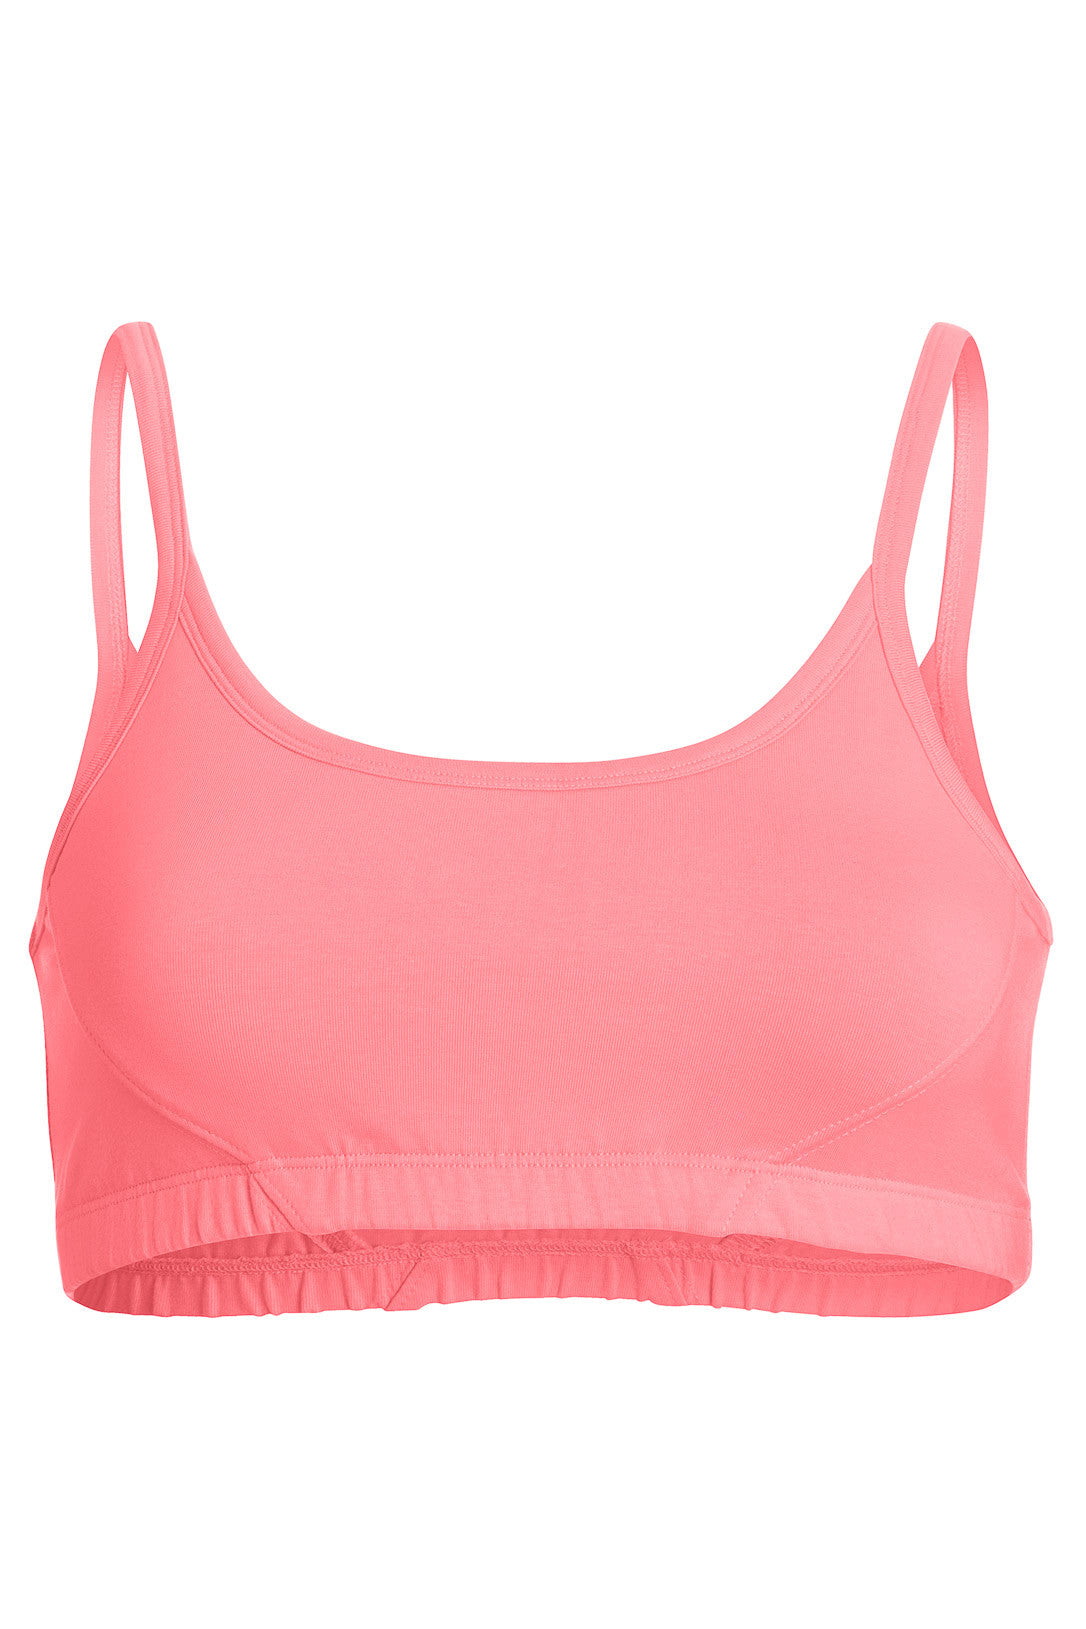 chemical free bras